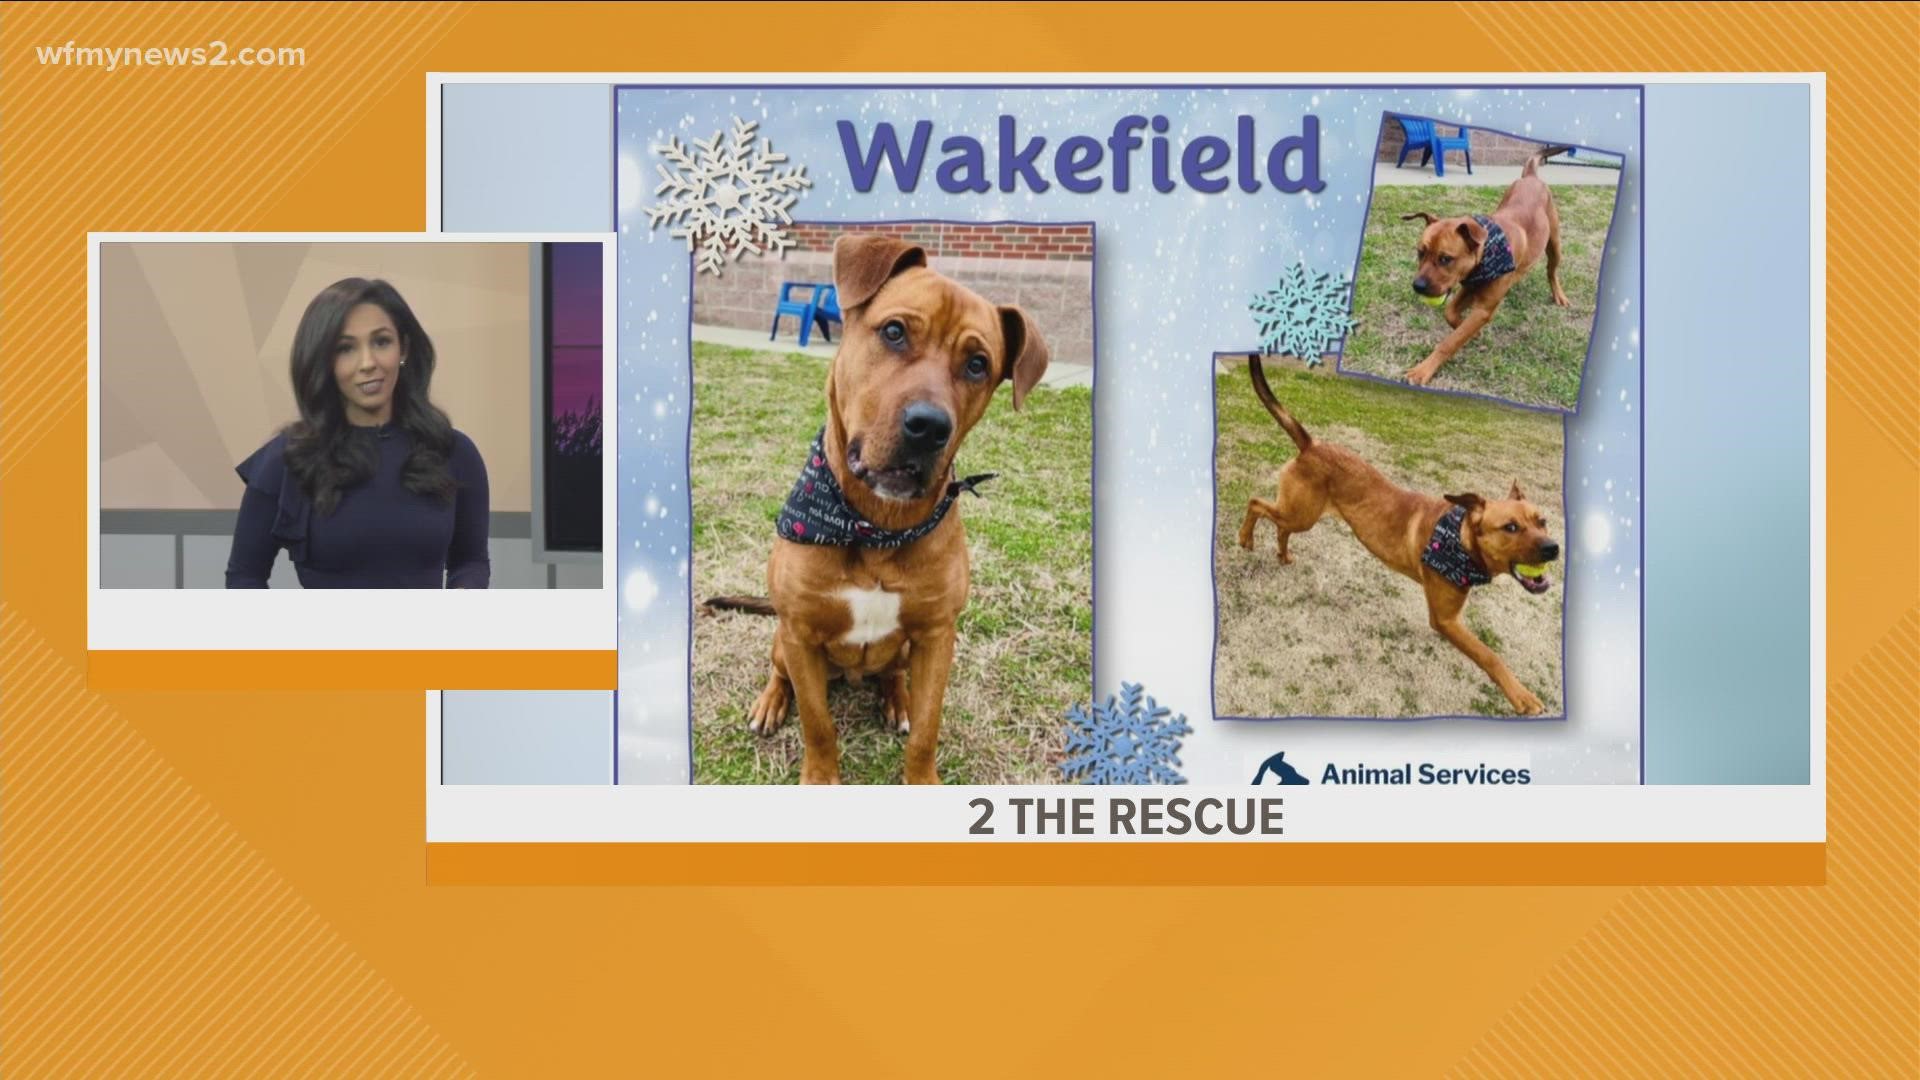 Let's get Wakefield adopted!